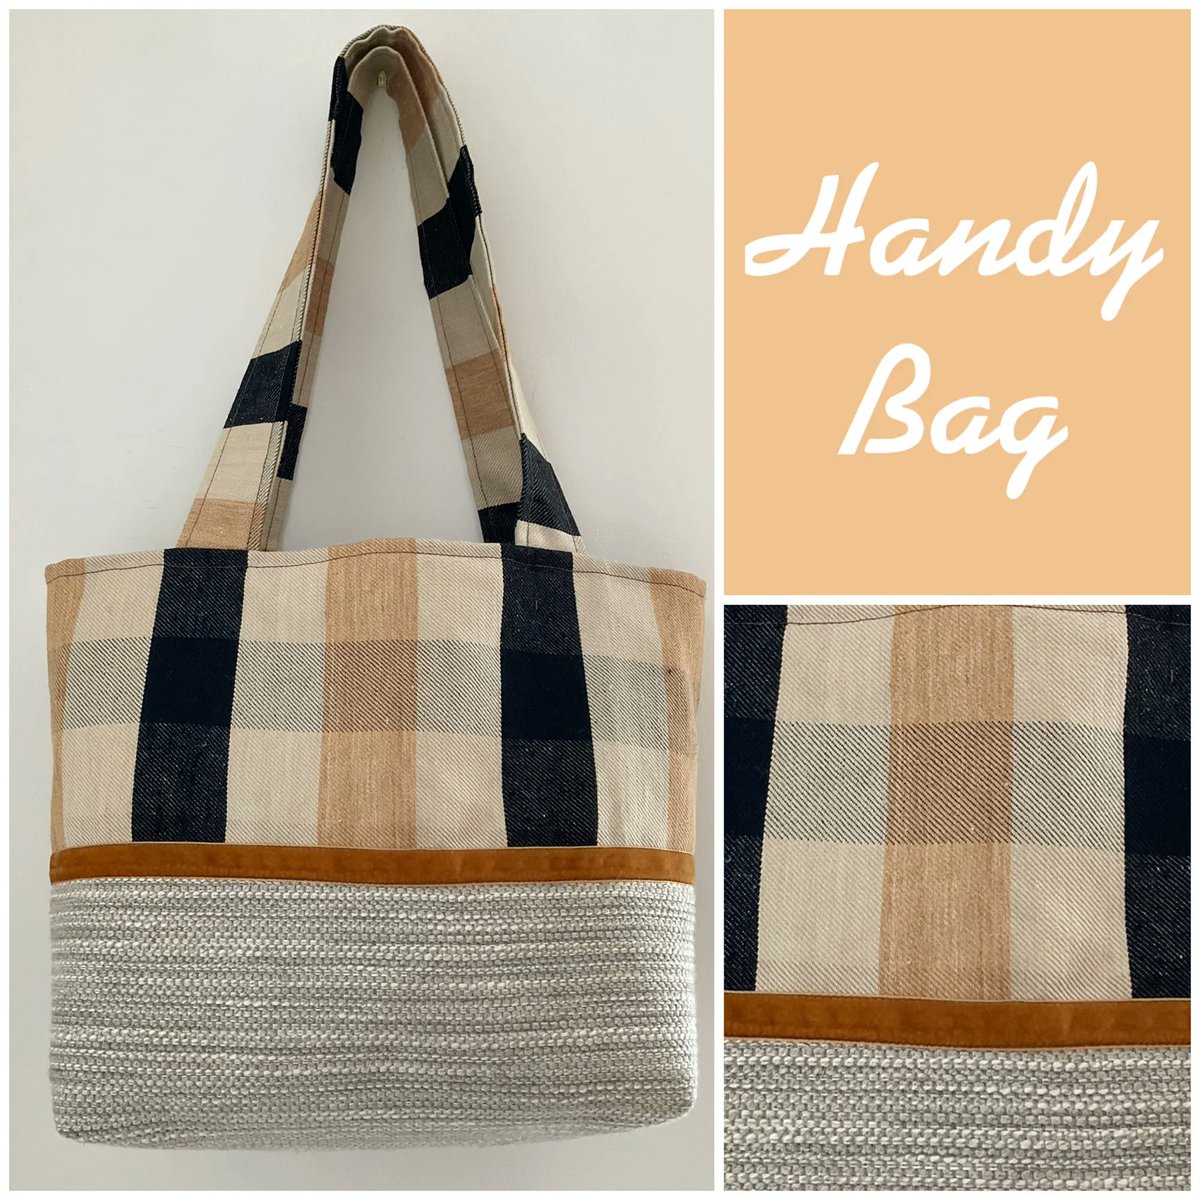 My Handy Bags – has a clip-in zipped purse, inner pocket, room for phone, mask, sanitiser, make-up, scarf, notebooks, Tablet, cardi, spare flats, gloves, water. Can be gift wrapped and sent direct or a self treat #craftbizparty #MHHSBD #SBS buff.ly/2F1nKi1